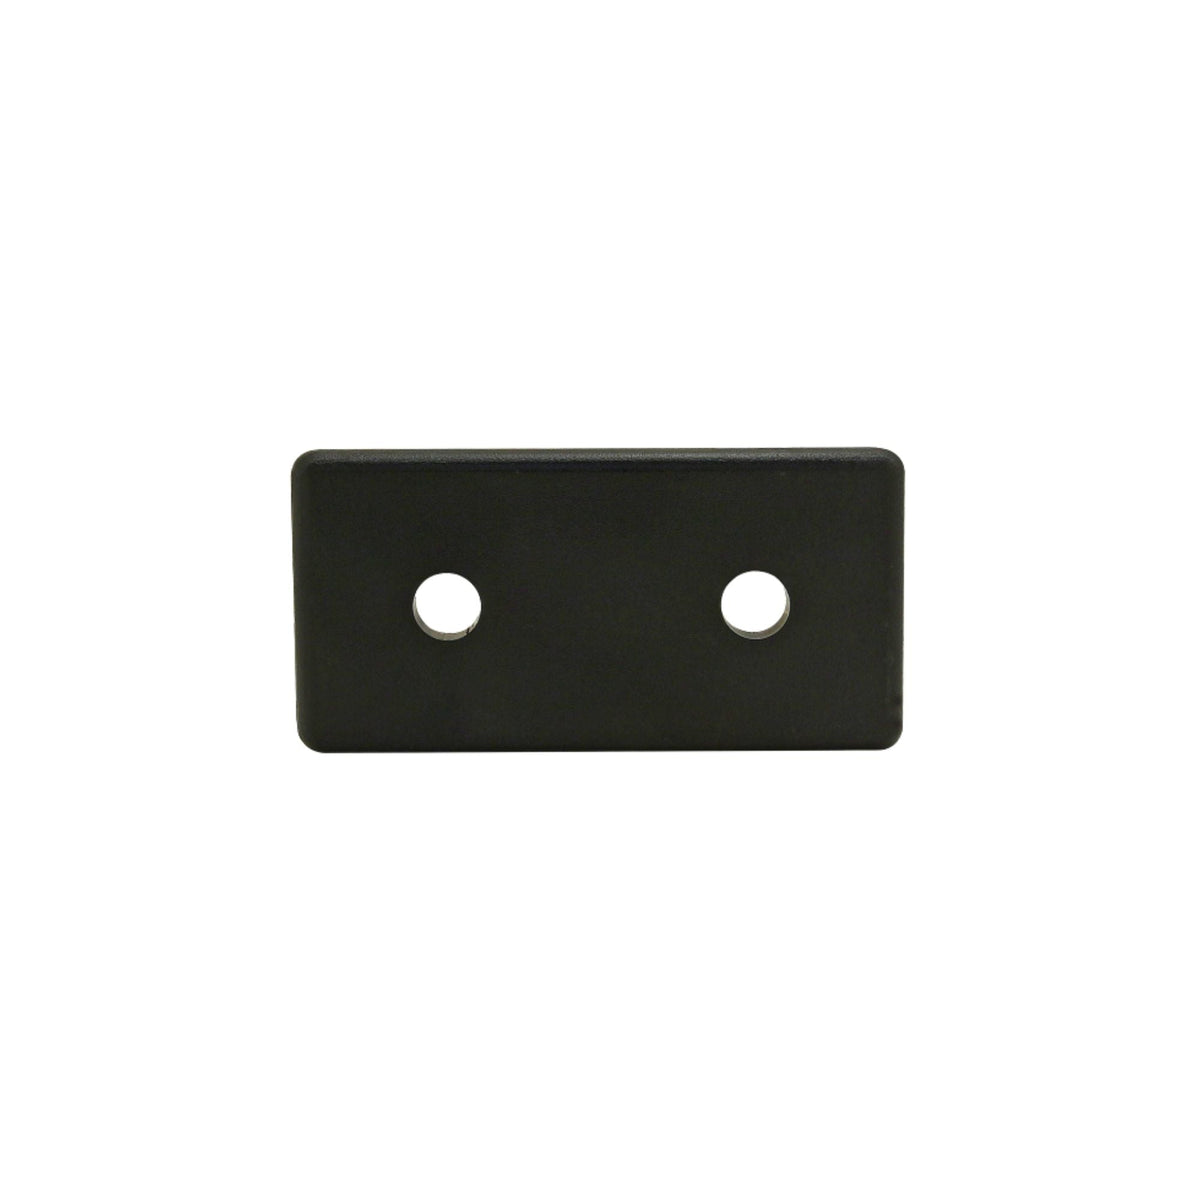 side view of a black rectangular end cap with two mounting holes